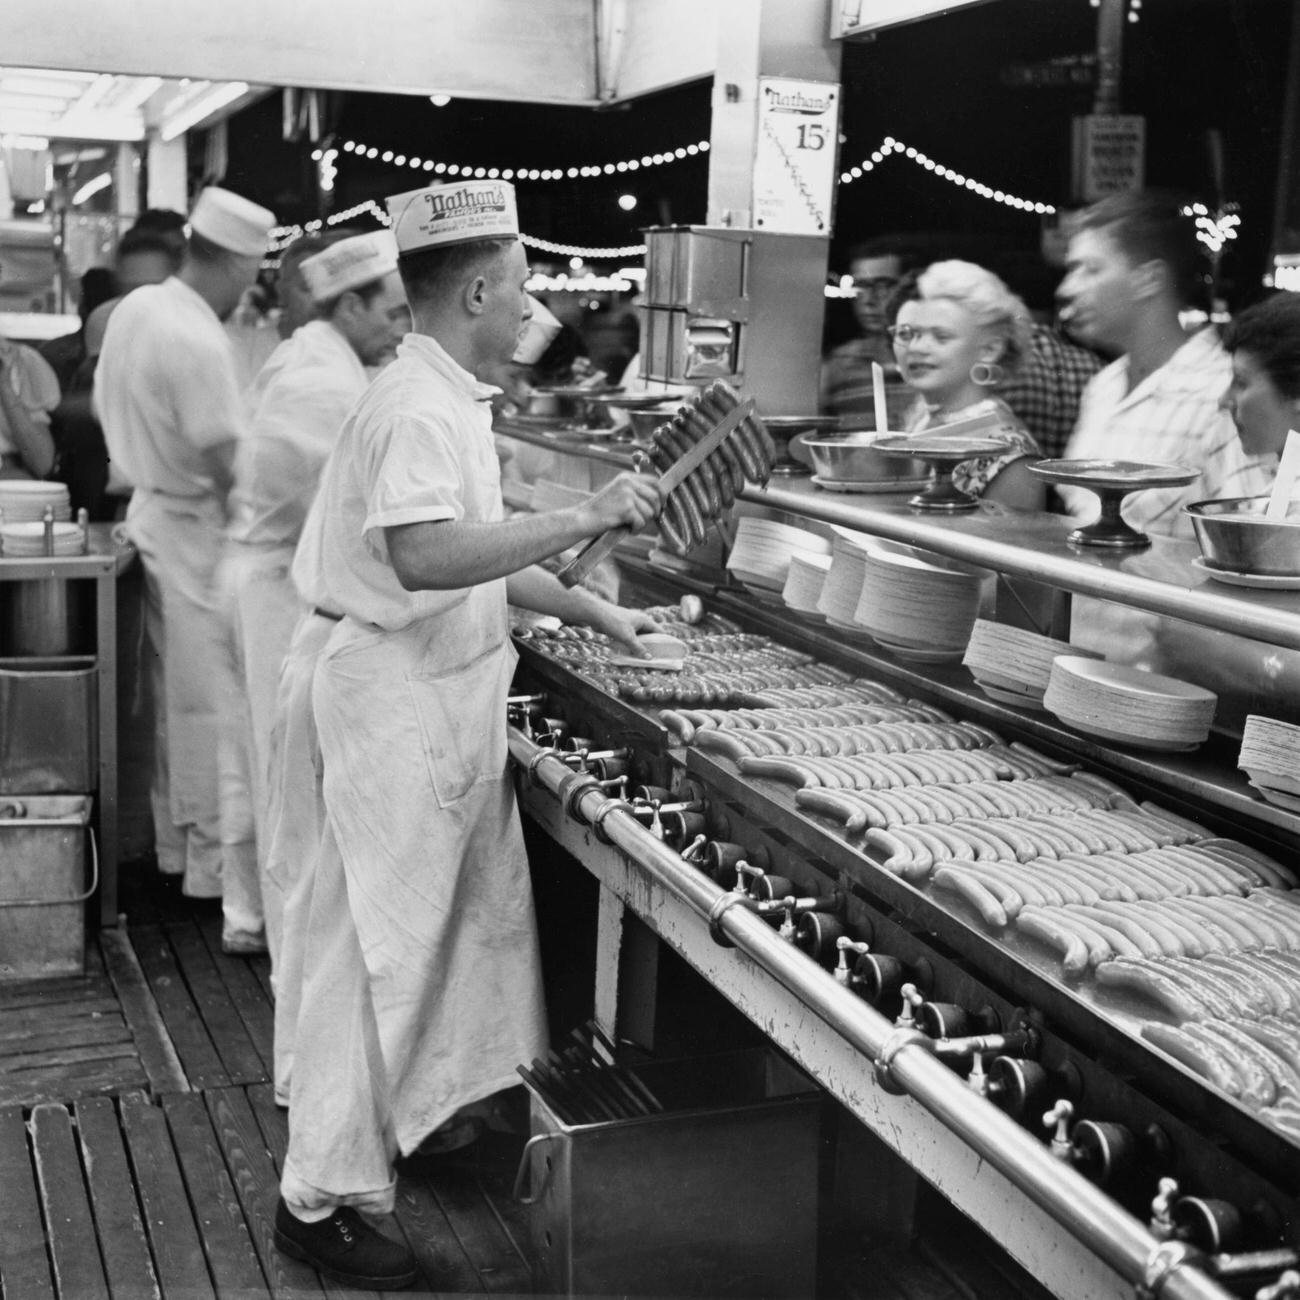 Men Cooking Hot Dogs At Nathan'S, August 1954